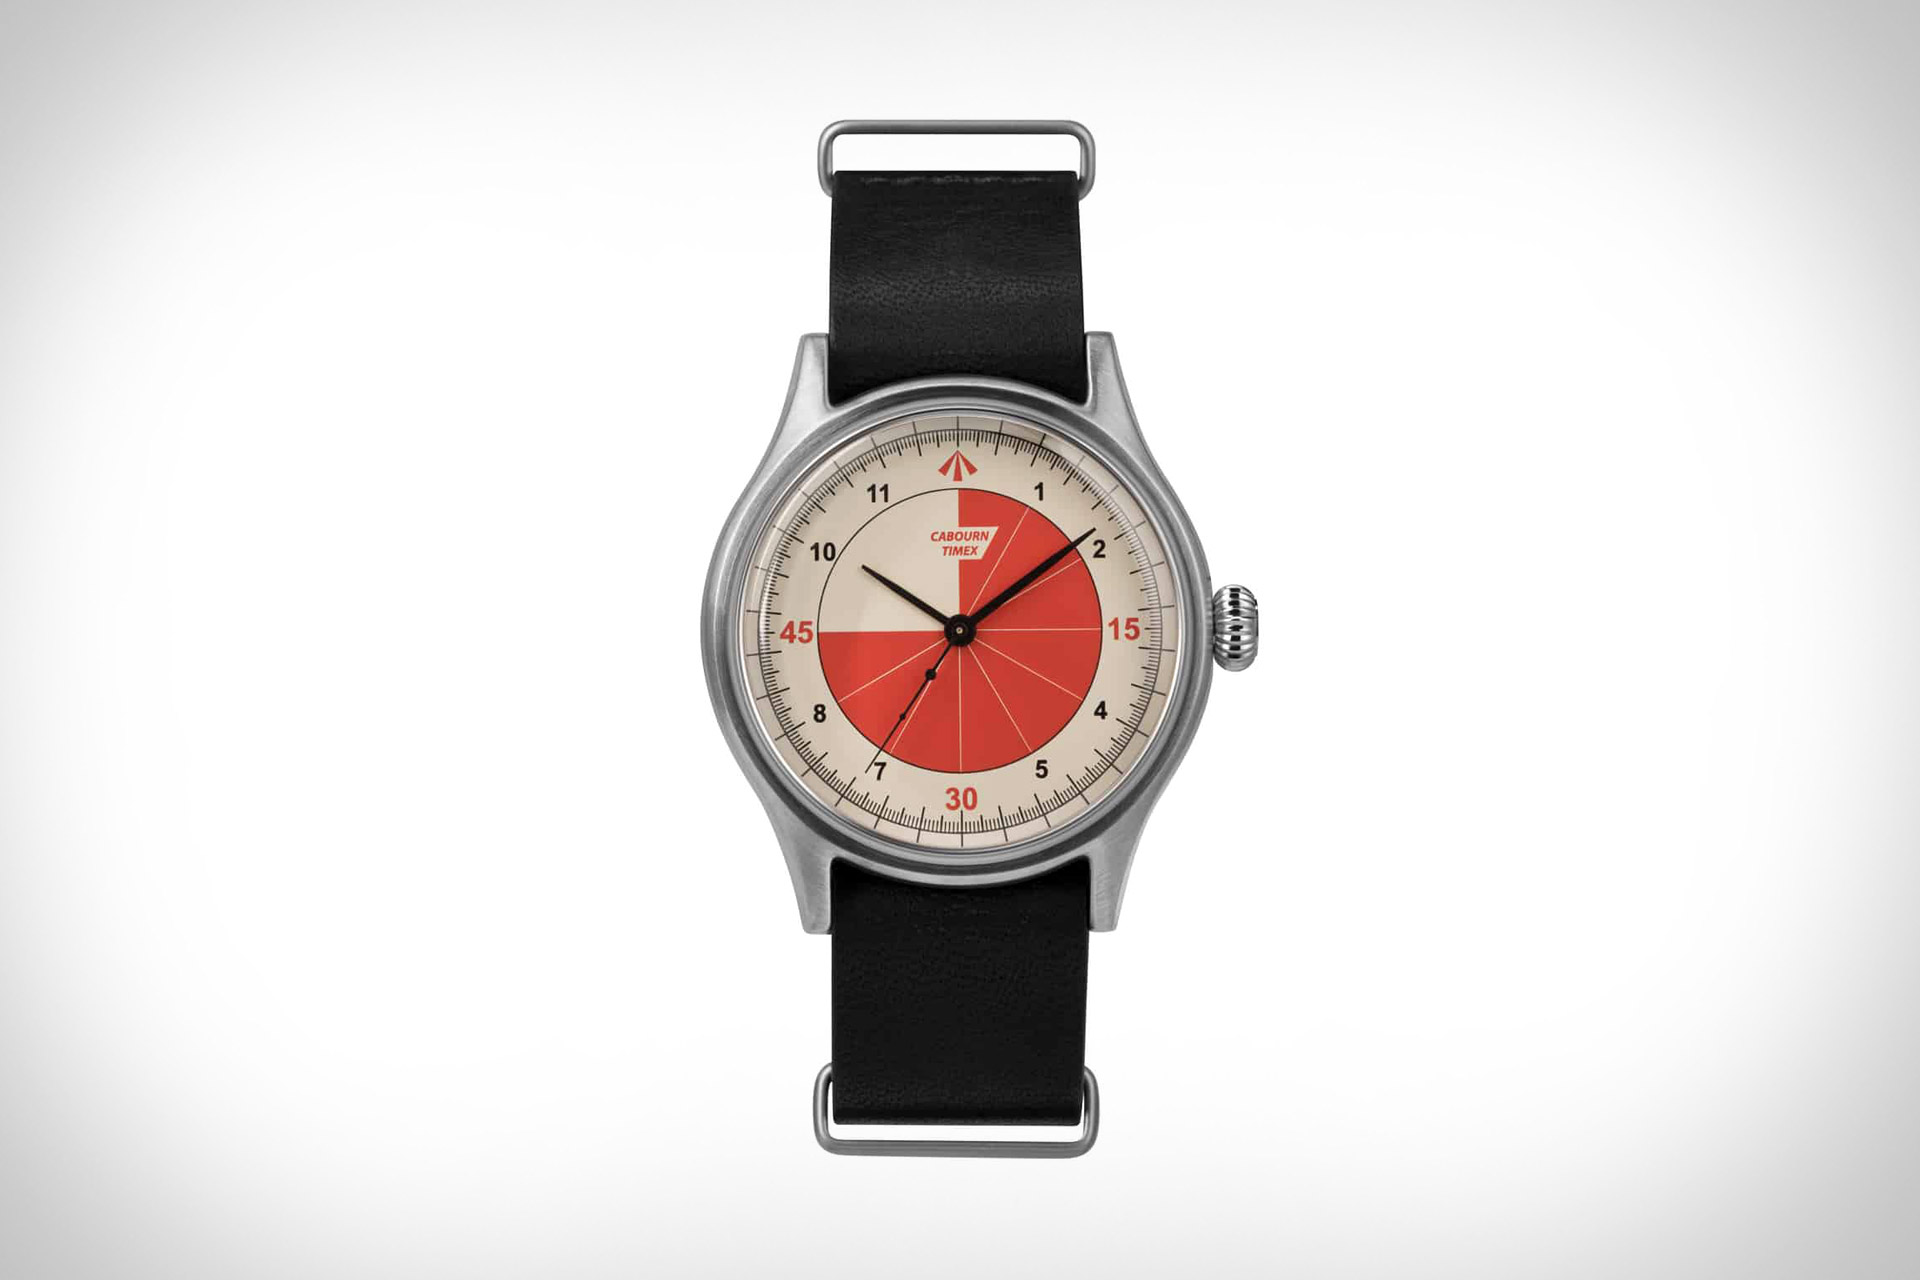 Cabourn timex referee 1